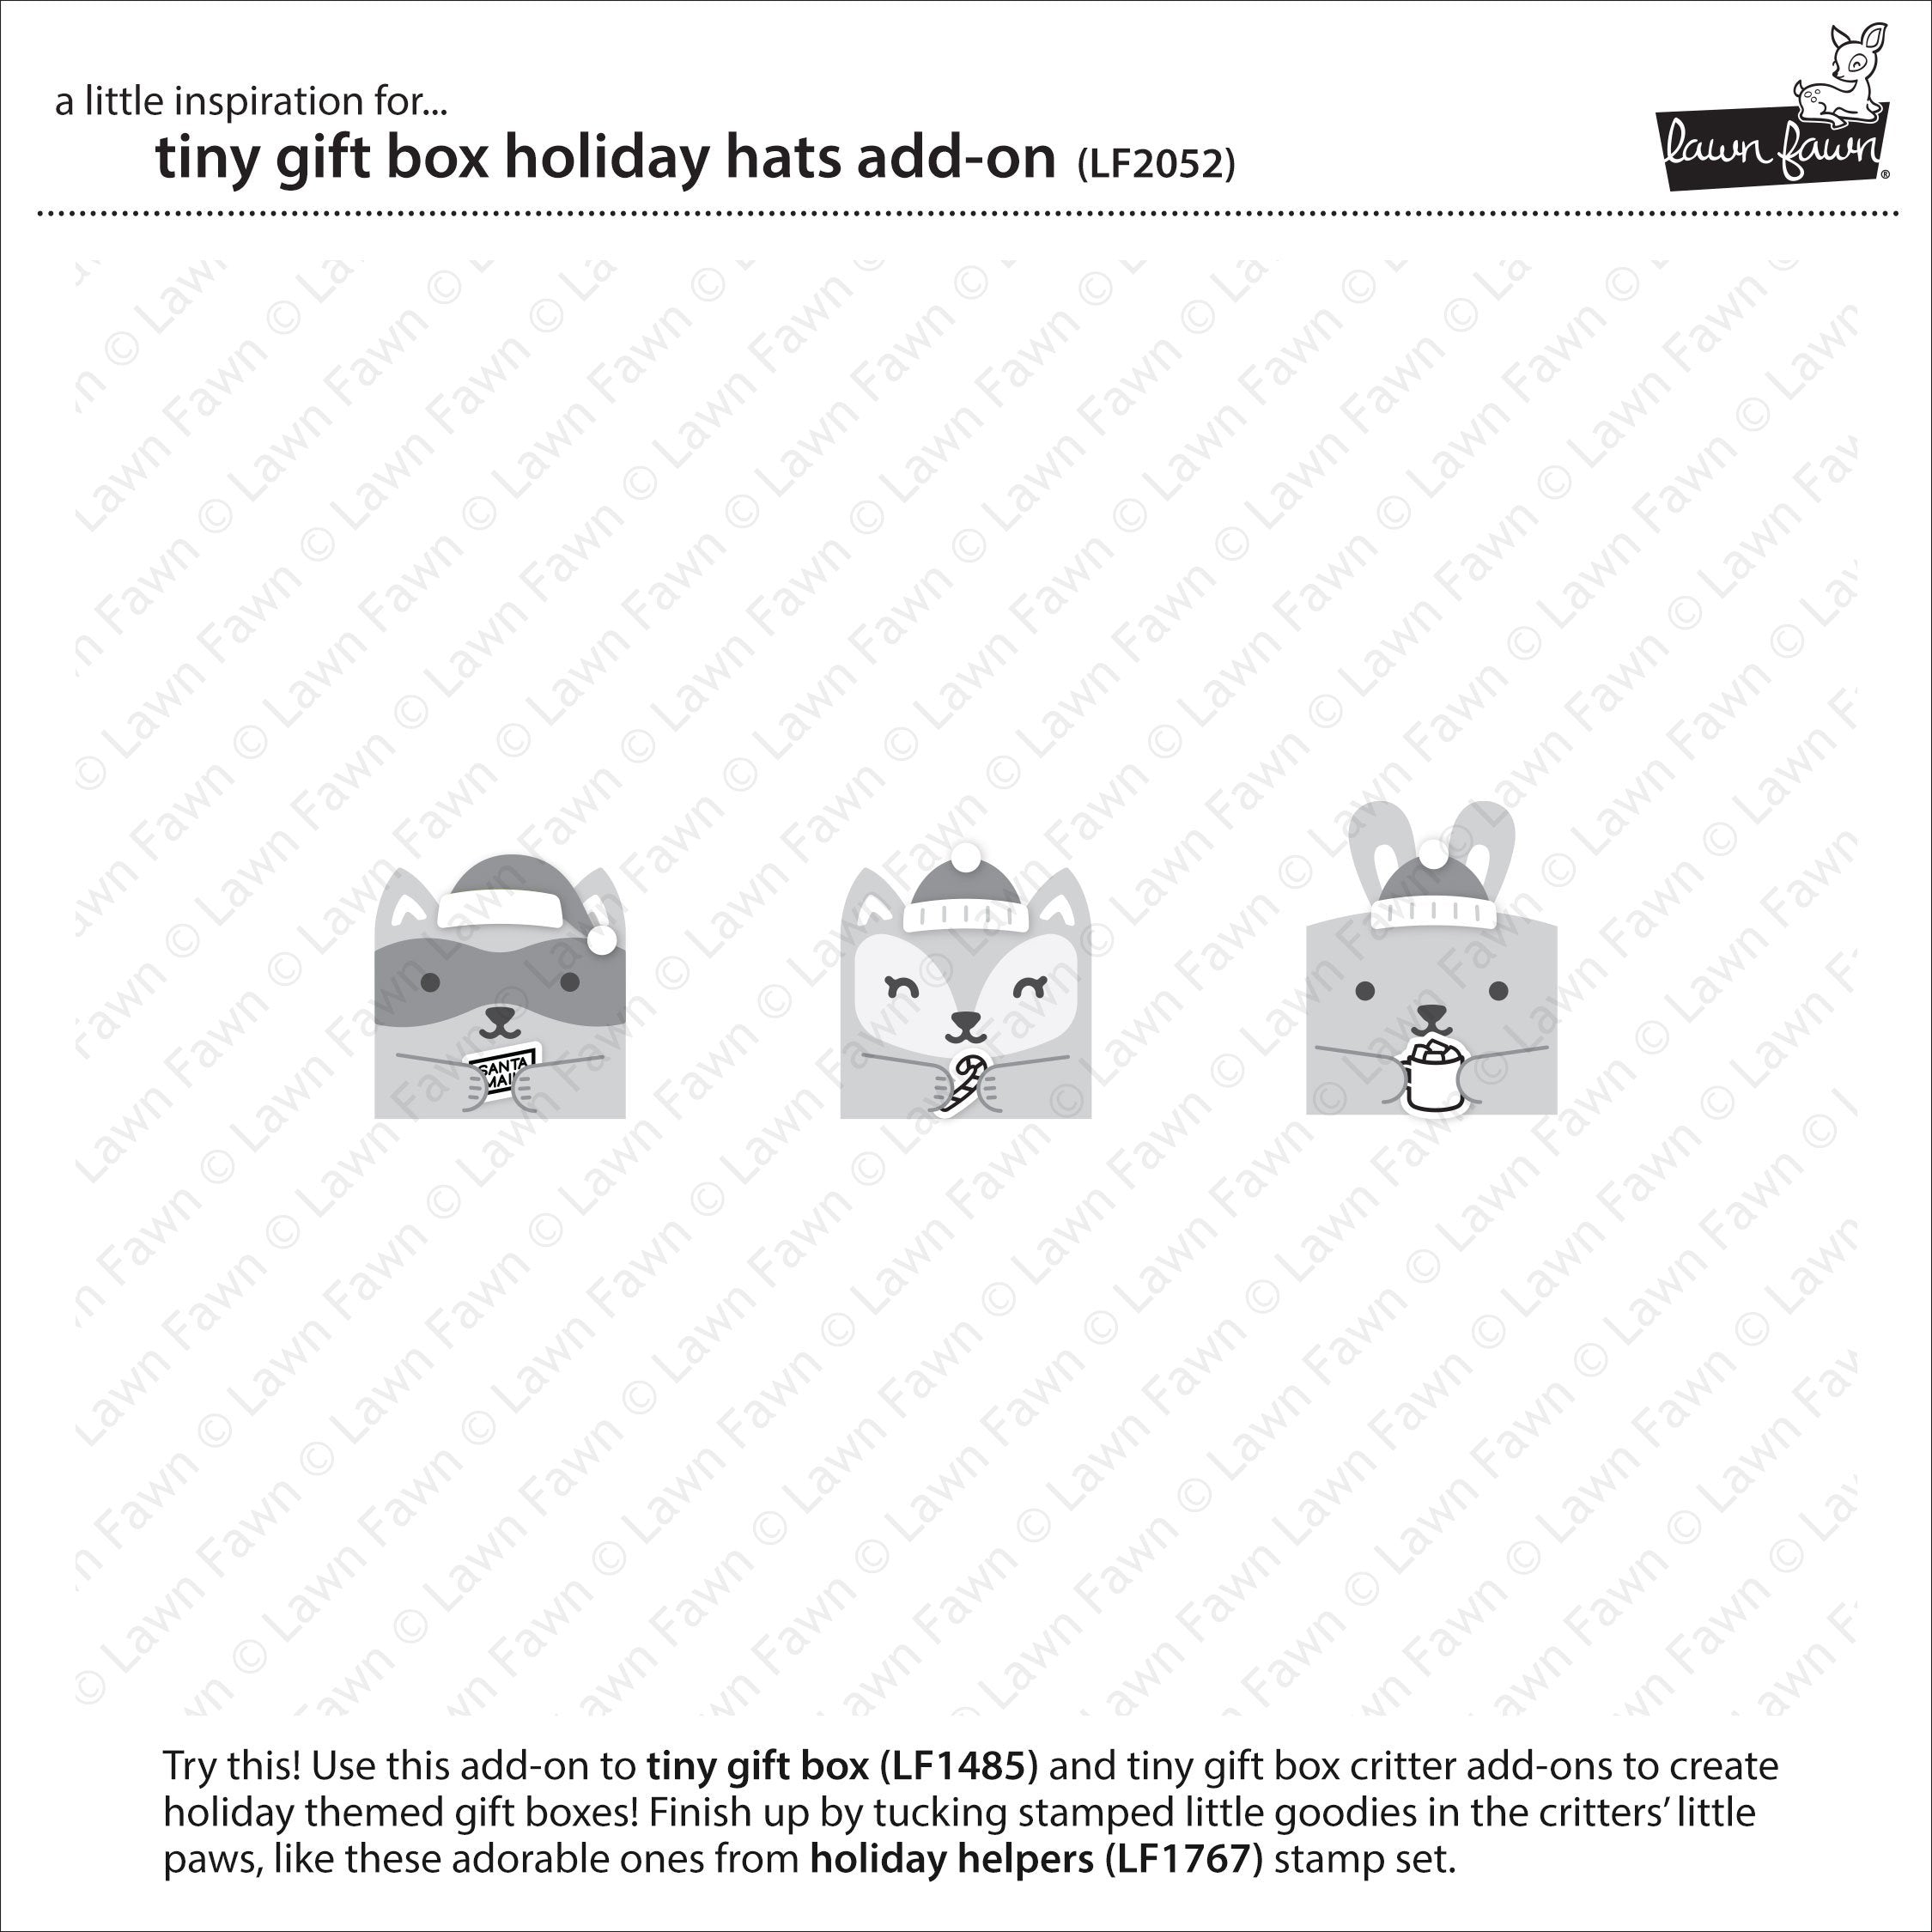 Lawn Fawn Tiny Gift Box Holiday Hats Add-On  ̹ ˻